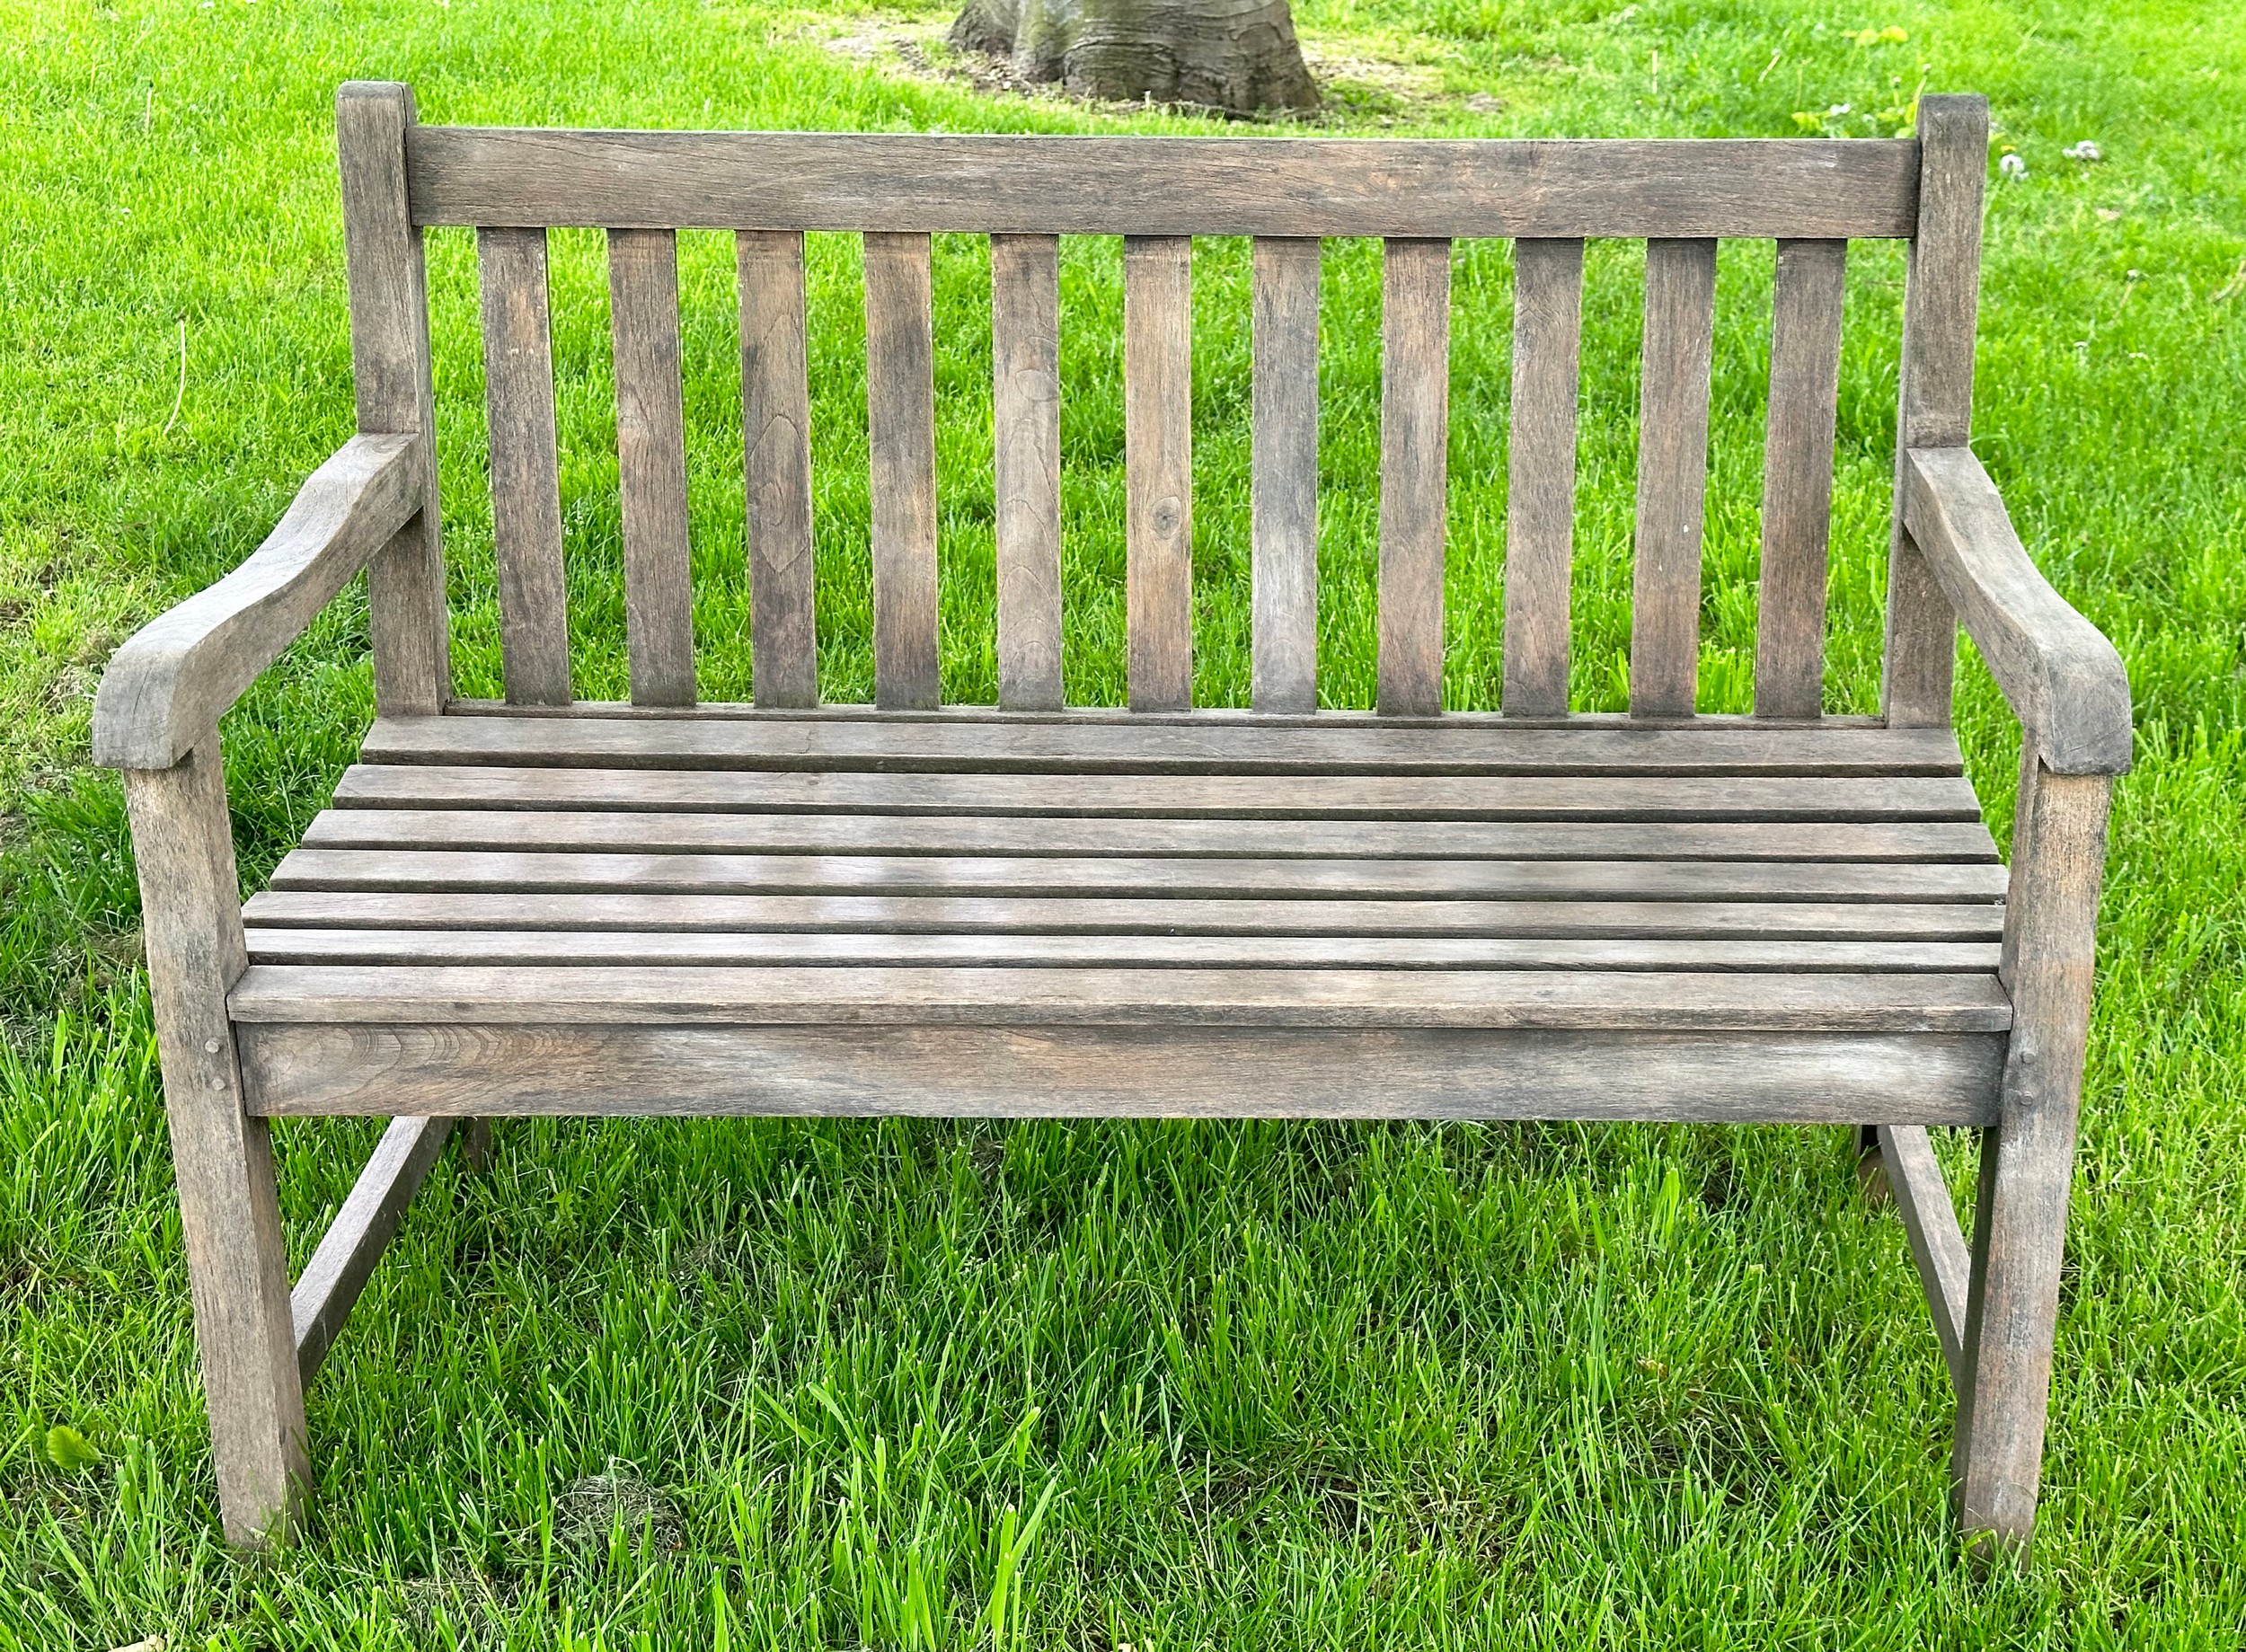 GARDEN BENCH, well weathered teak of slatted and pegged construction with shaped arms, 120cm W. - Image 2 of 6